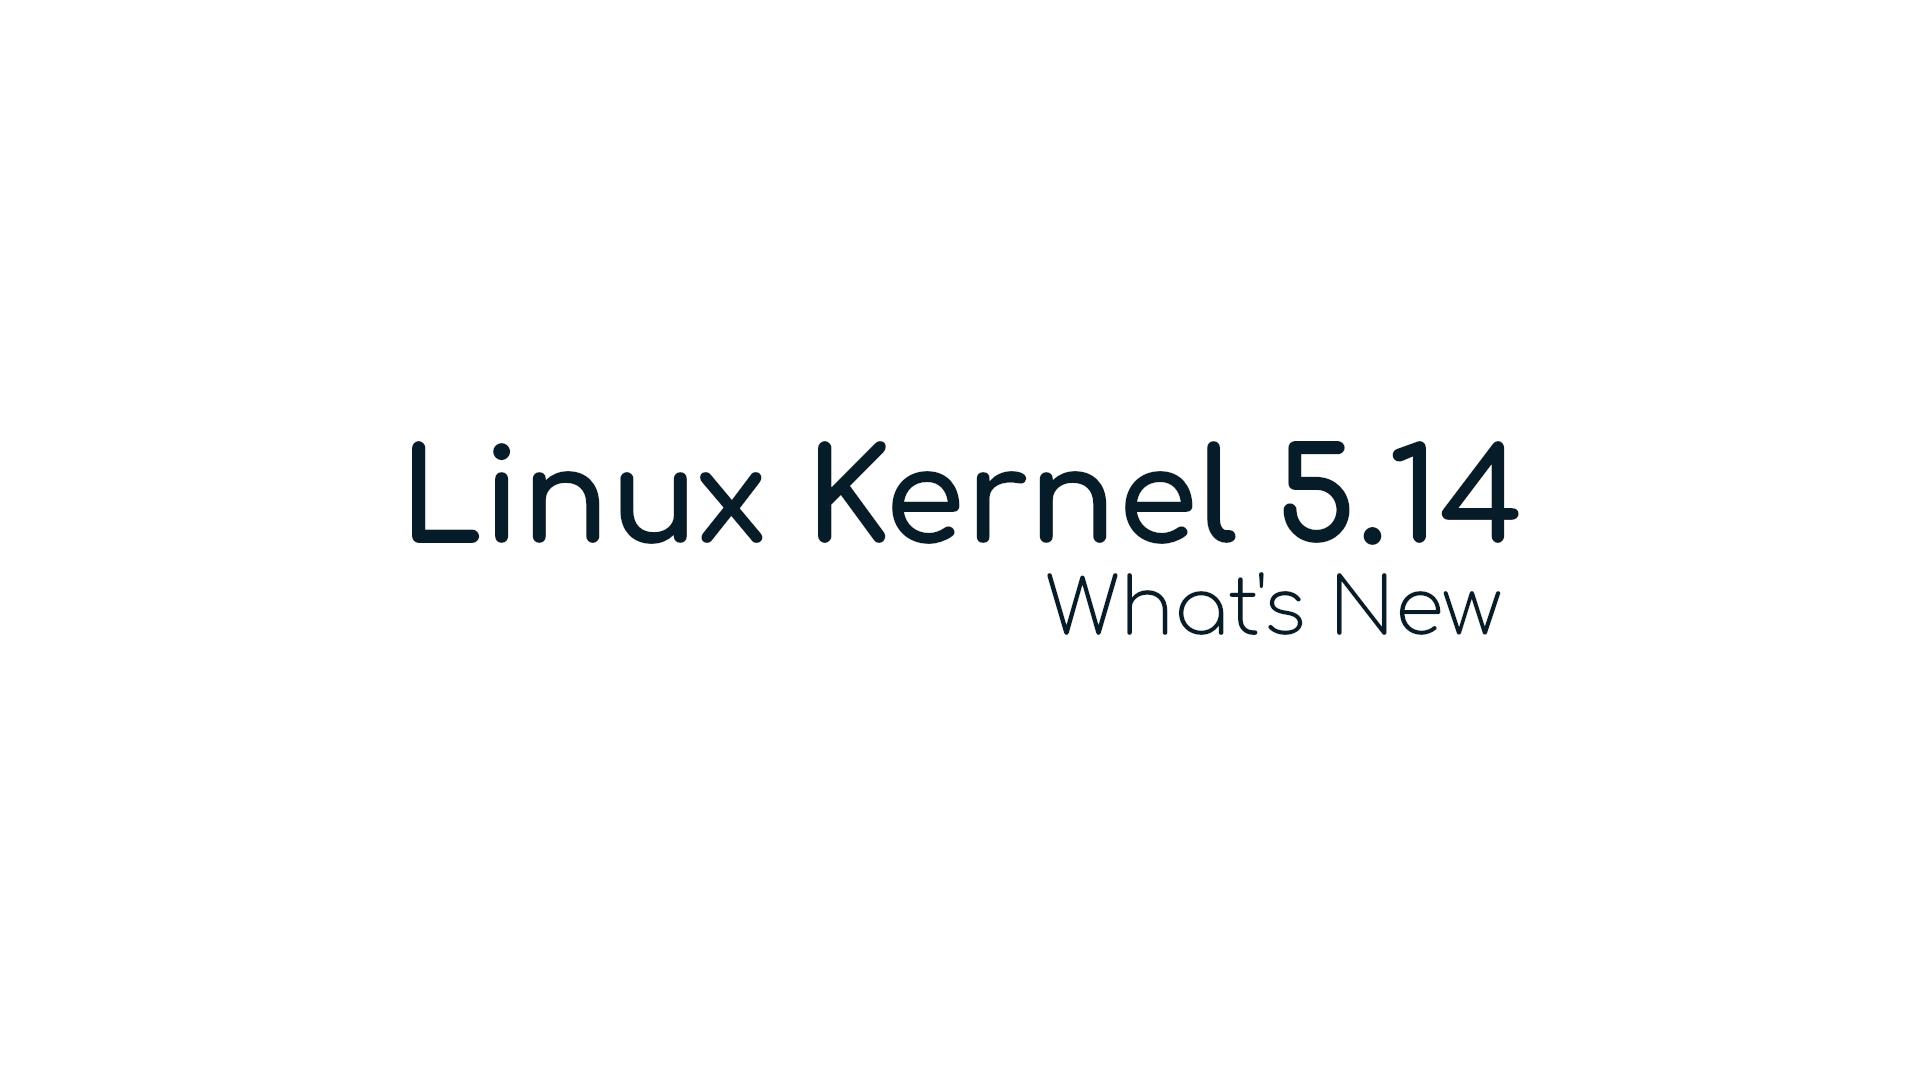 Linux Kernel 5.14 Officially Released, This Is What’s New